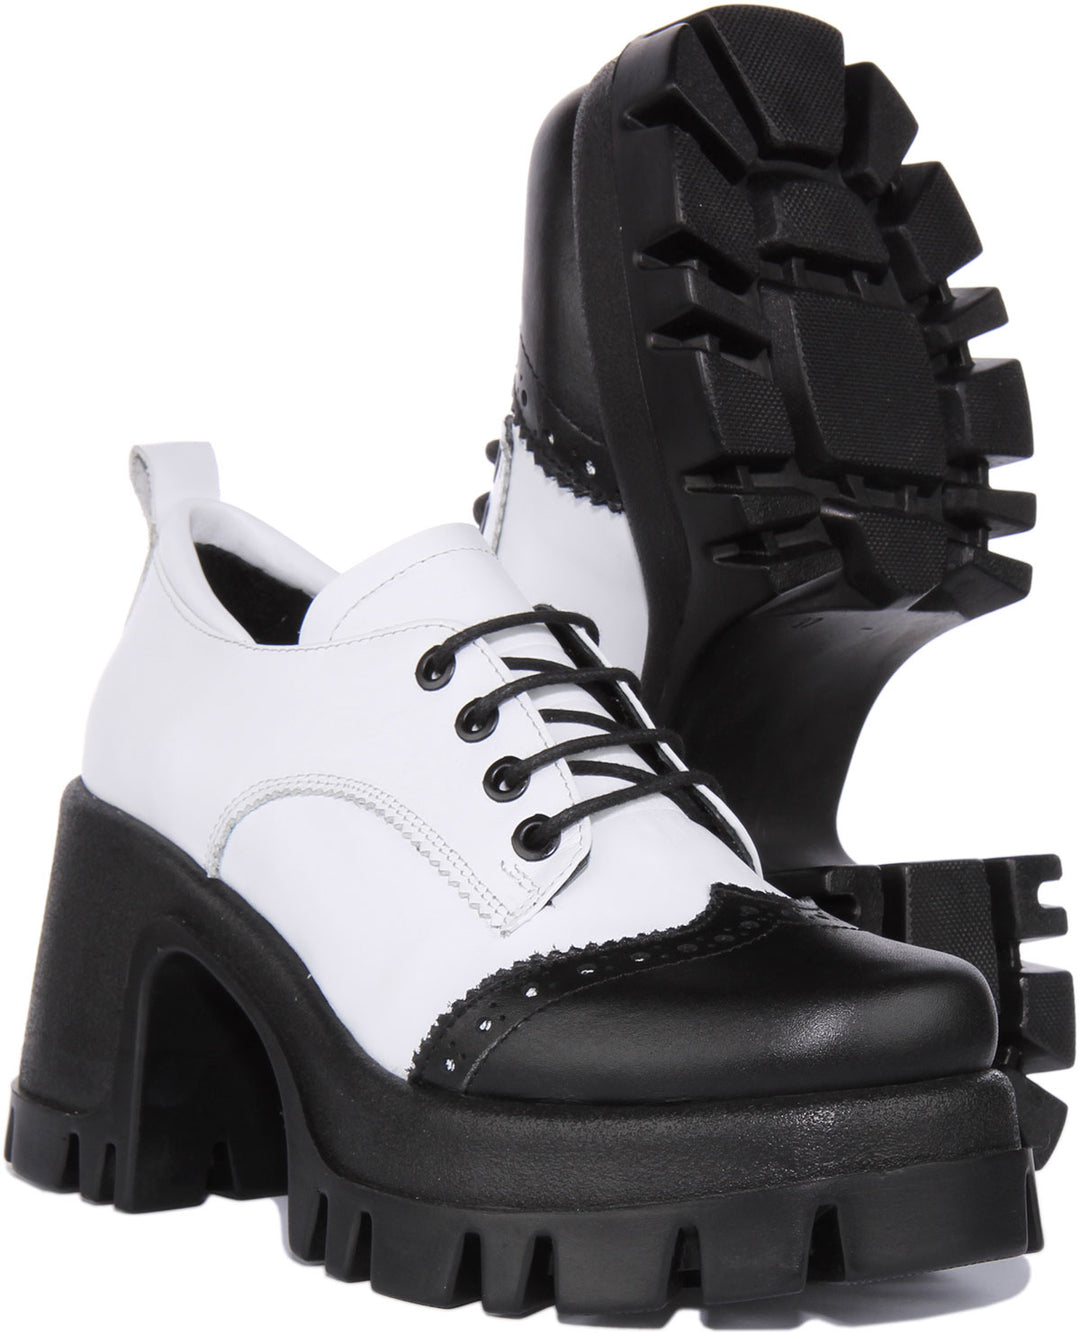 Justinreess England Lilly In Black White For Women